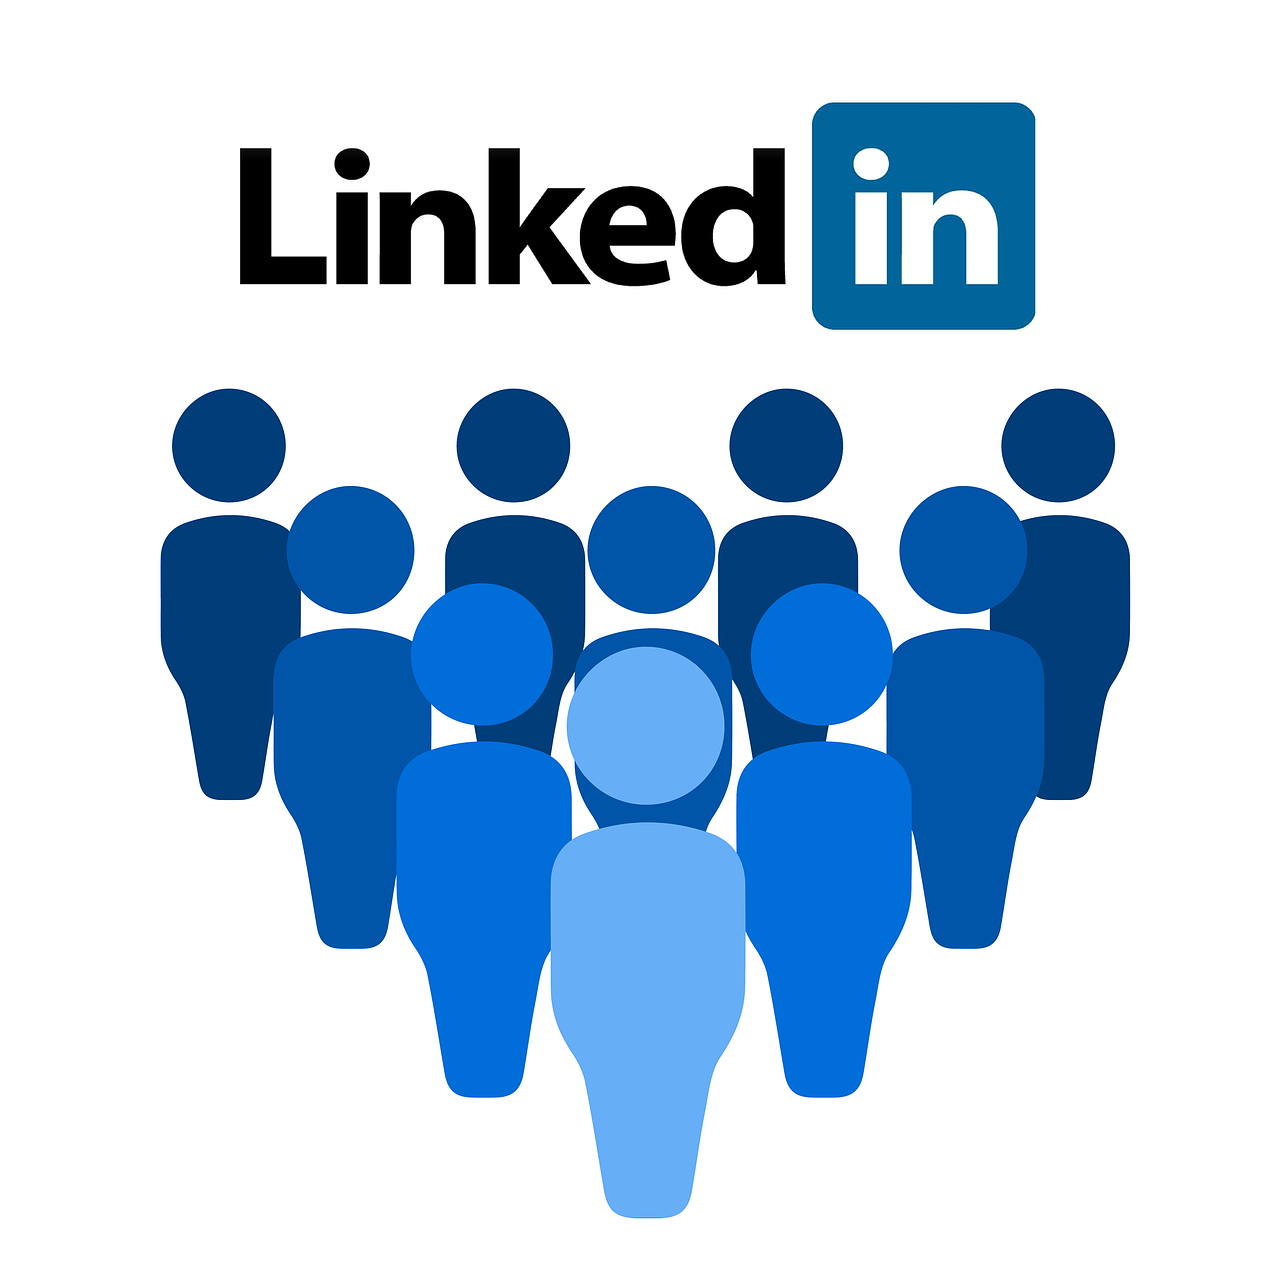 Read more about the article Unleash Your Marketing Potential: Where Can I Access LinkedIn Ads?<span class="rmp-archive-results-widget "><i class=" rmp-icon rmp-icon--ratings rmp-icon--star rmp-icon--full-highlight"></i><i class=" rmp-icon rmp-icon--ratings rmp-icon--star rmp-icon--full-highlight"></i><i class=" rmp-icon rmp-icon--ratings rmp-icon--star rmp-icon--full-highlight"></i><i class=" rmp-icon rmp-icon--ratings rmp-icon--star rmp-icon--full-highlight"></i><i class=" rmp-icon rmp-icon--ratings rmp-icon--star rmp-icon--full-highlight"></i> <span>5 (142)</span></span>